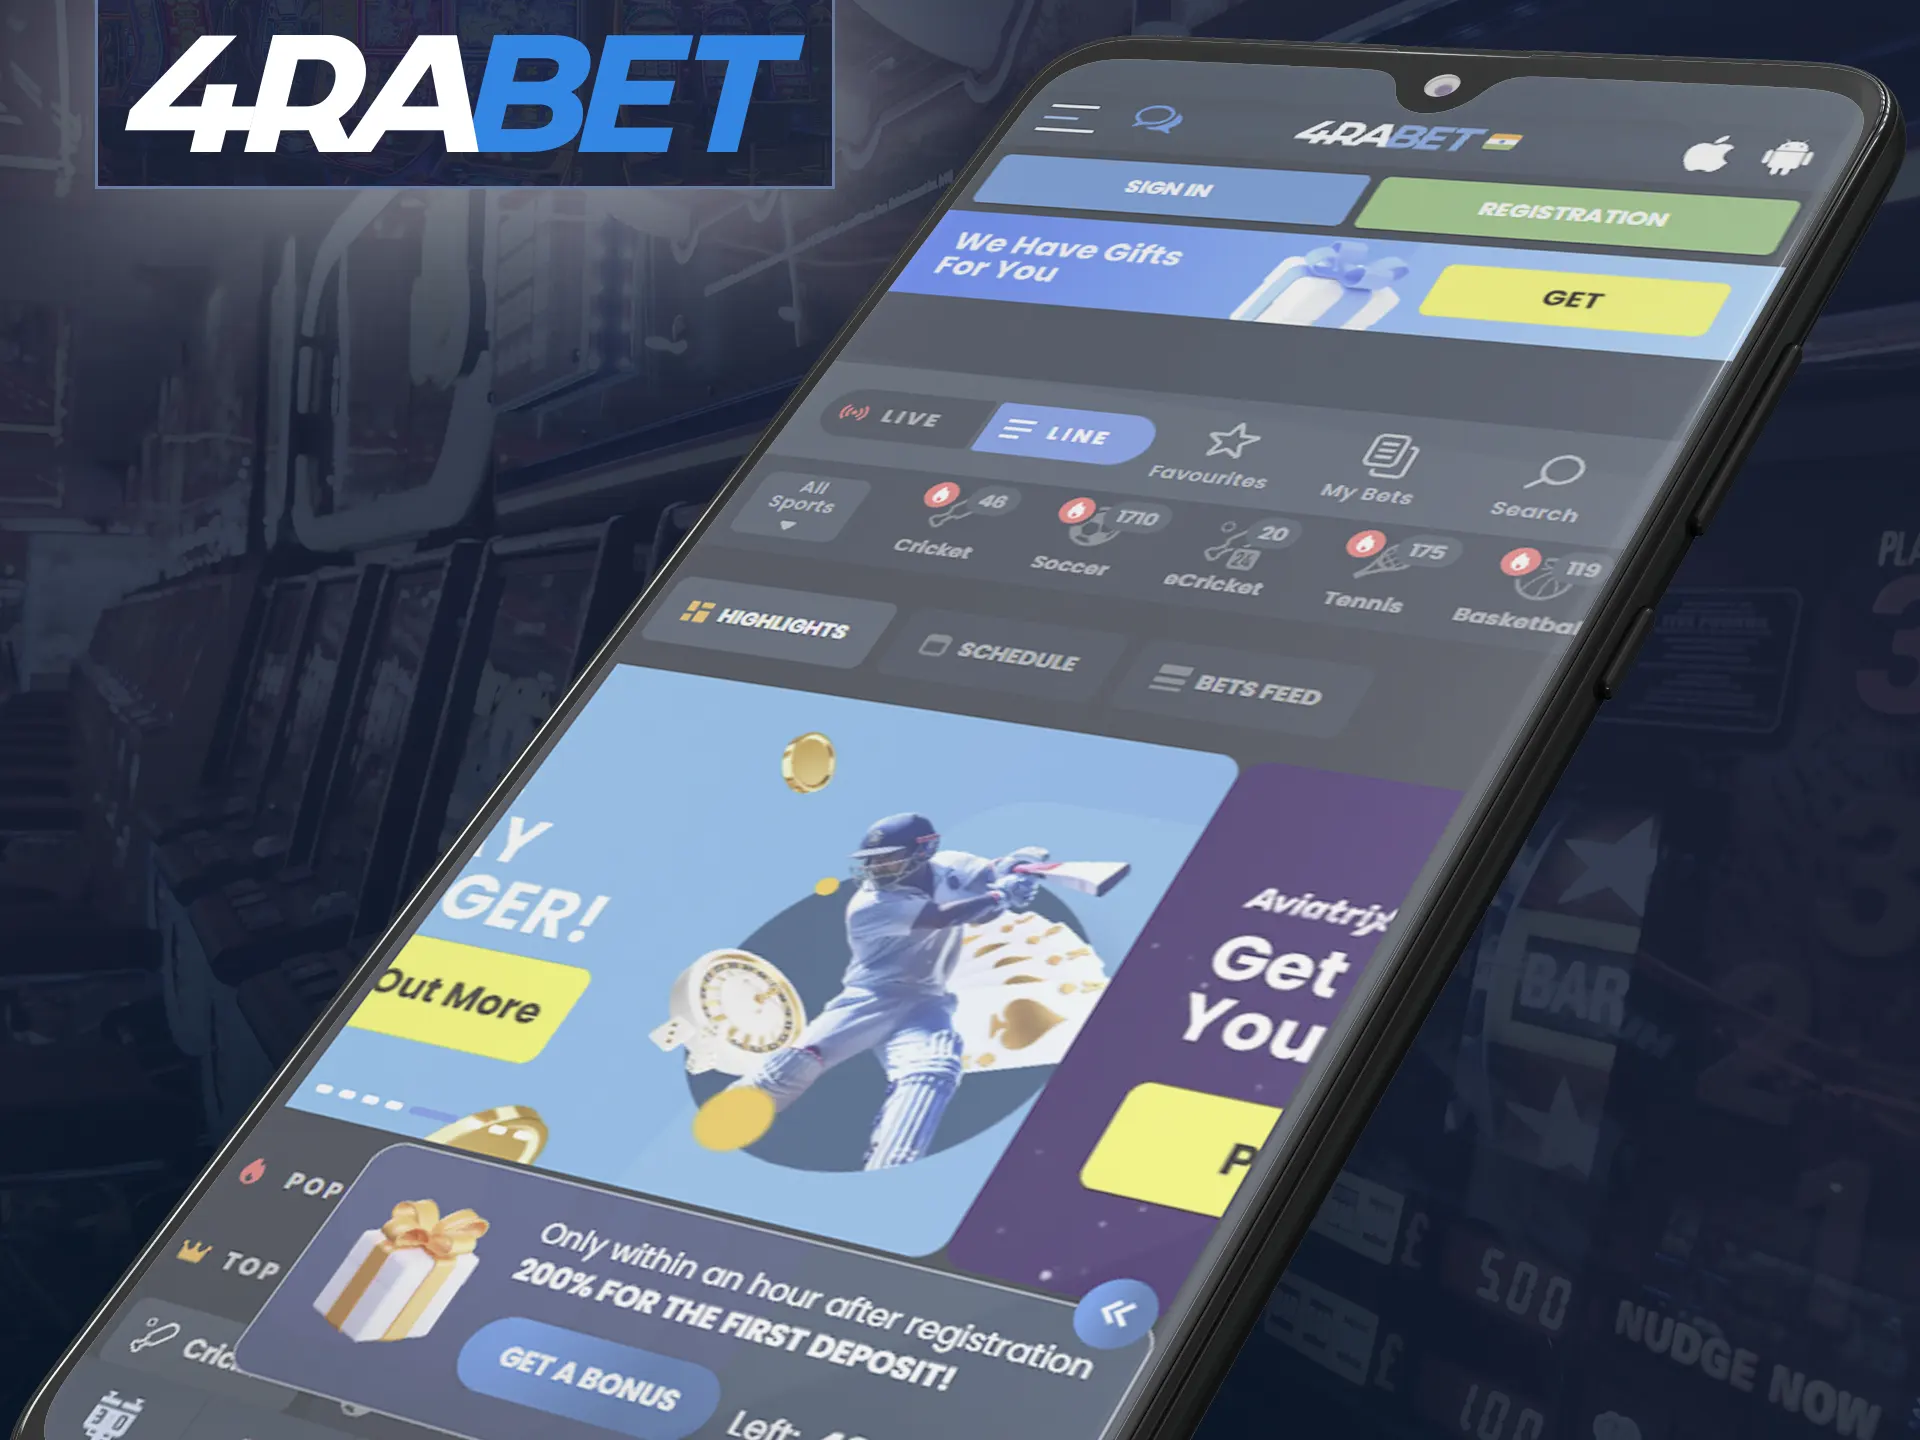 Players can play on 4Rabet from mobile devices via any mobile browser.